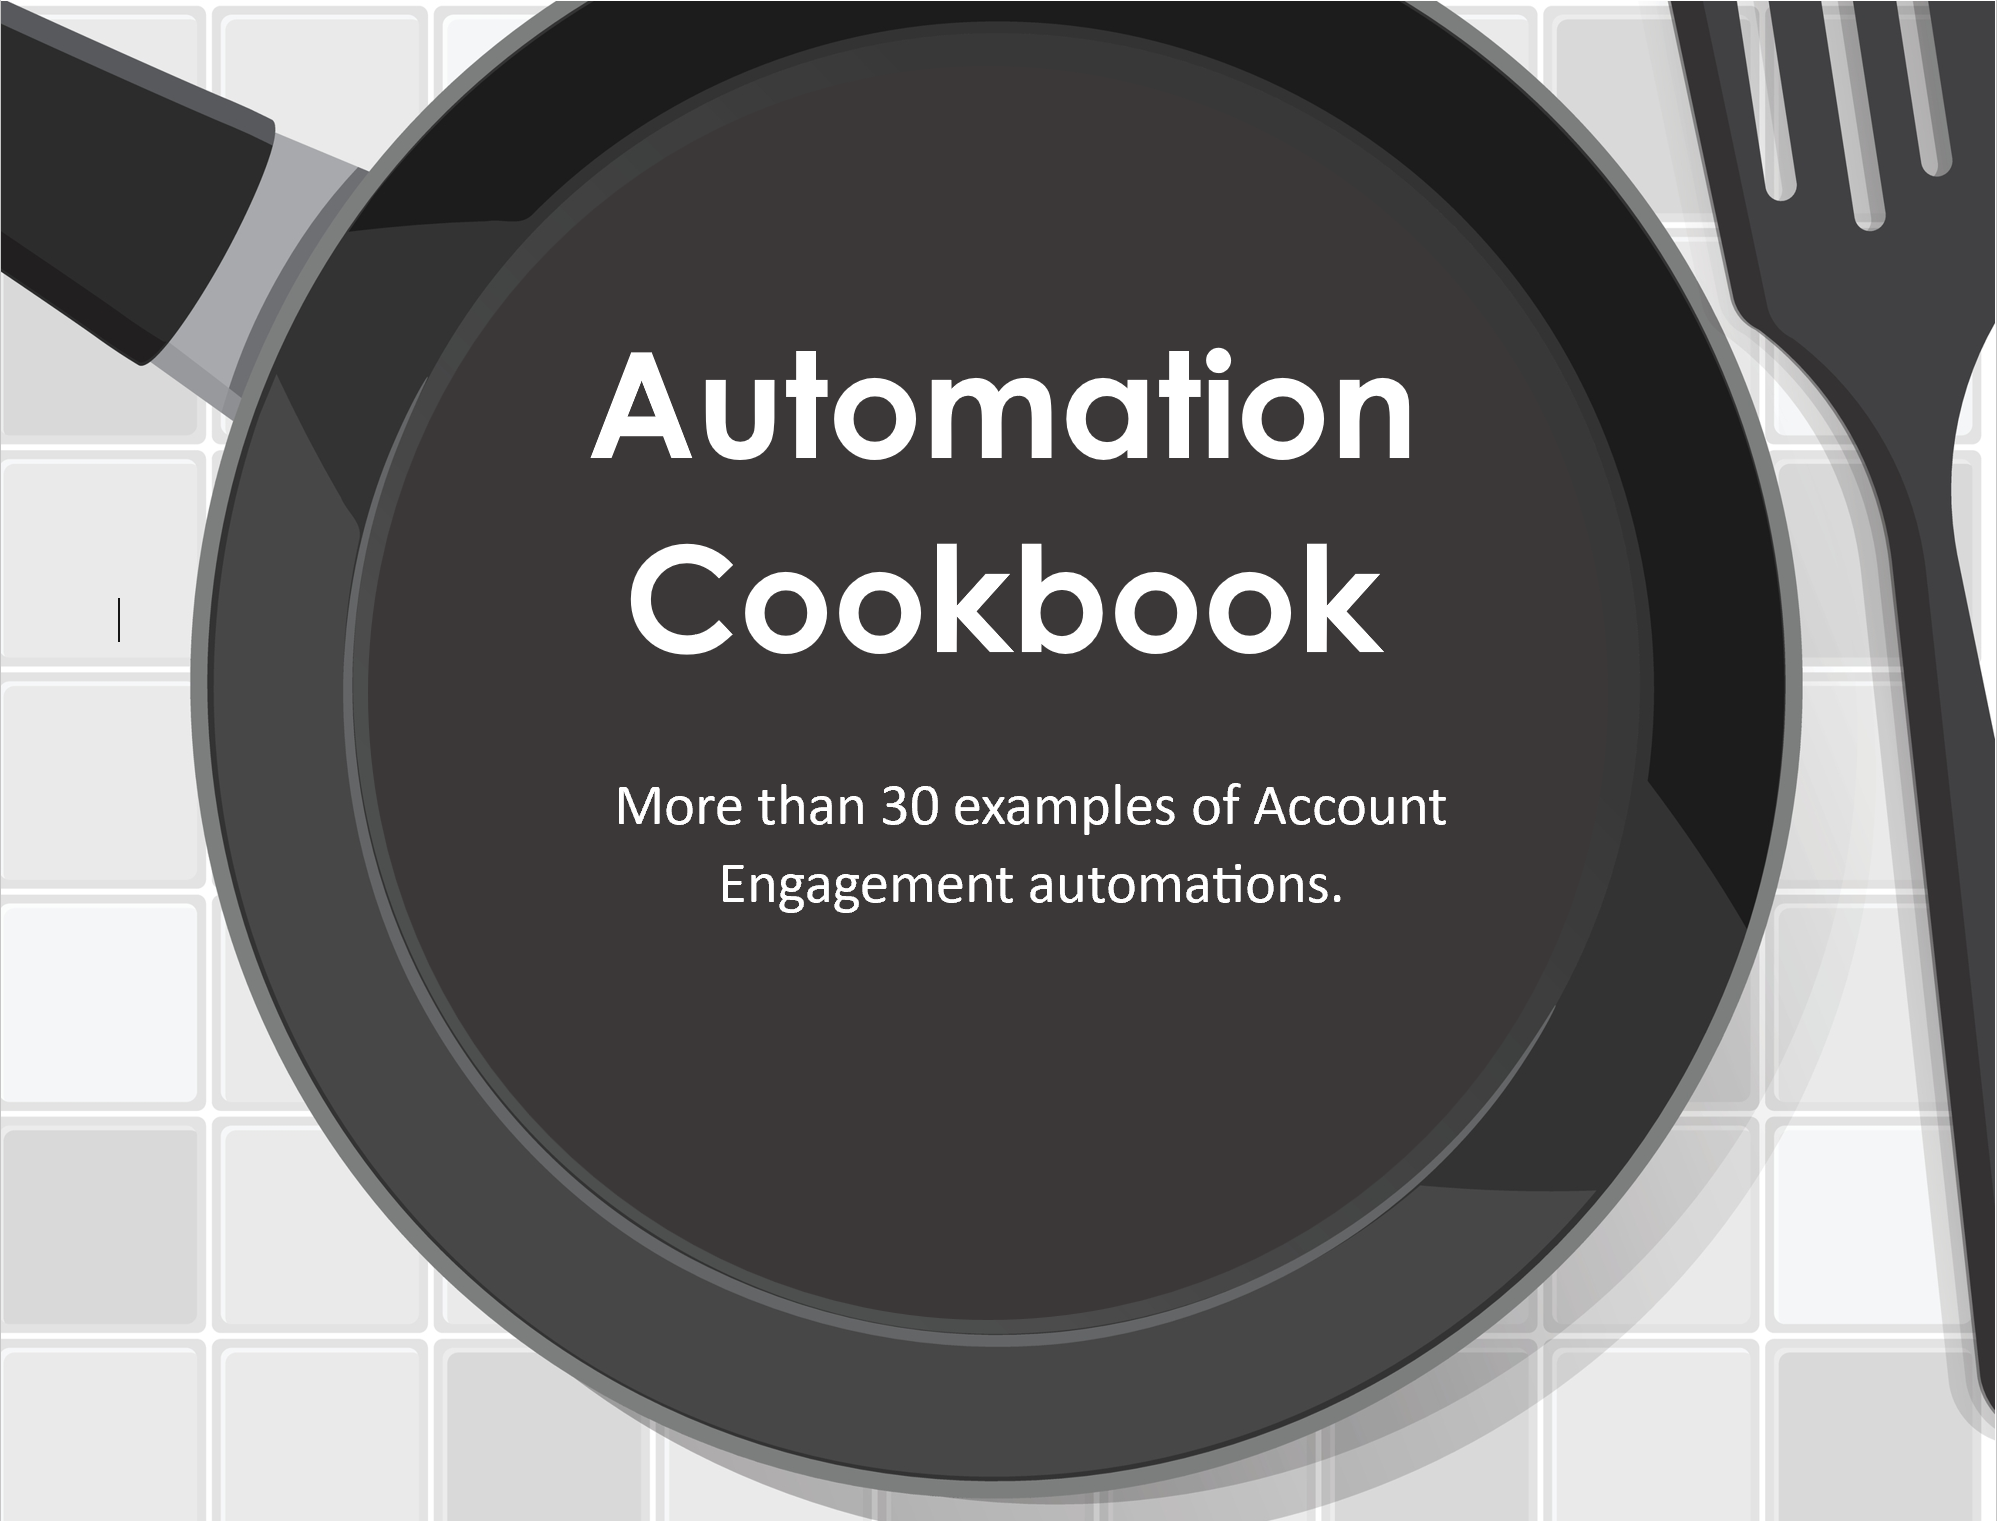 Account Engagement Automation Cookbook - dynamic list, automation rule and completion actions